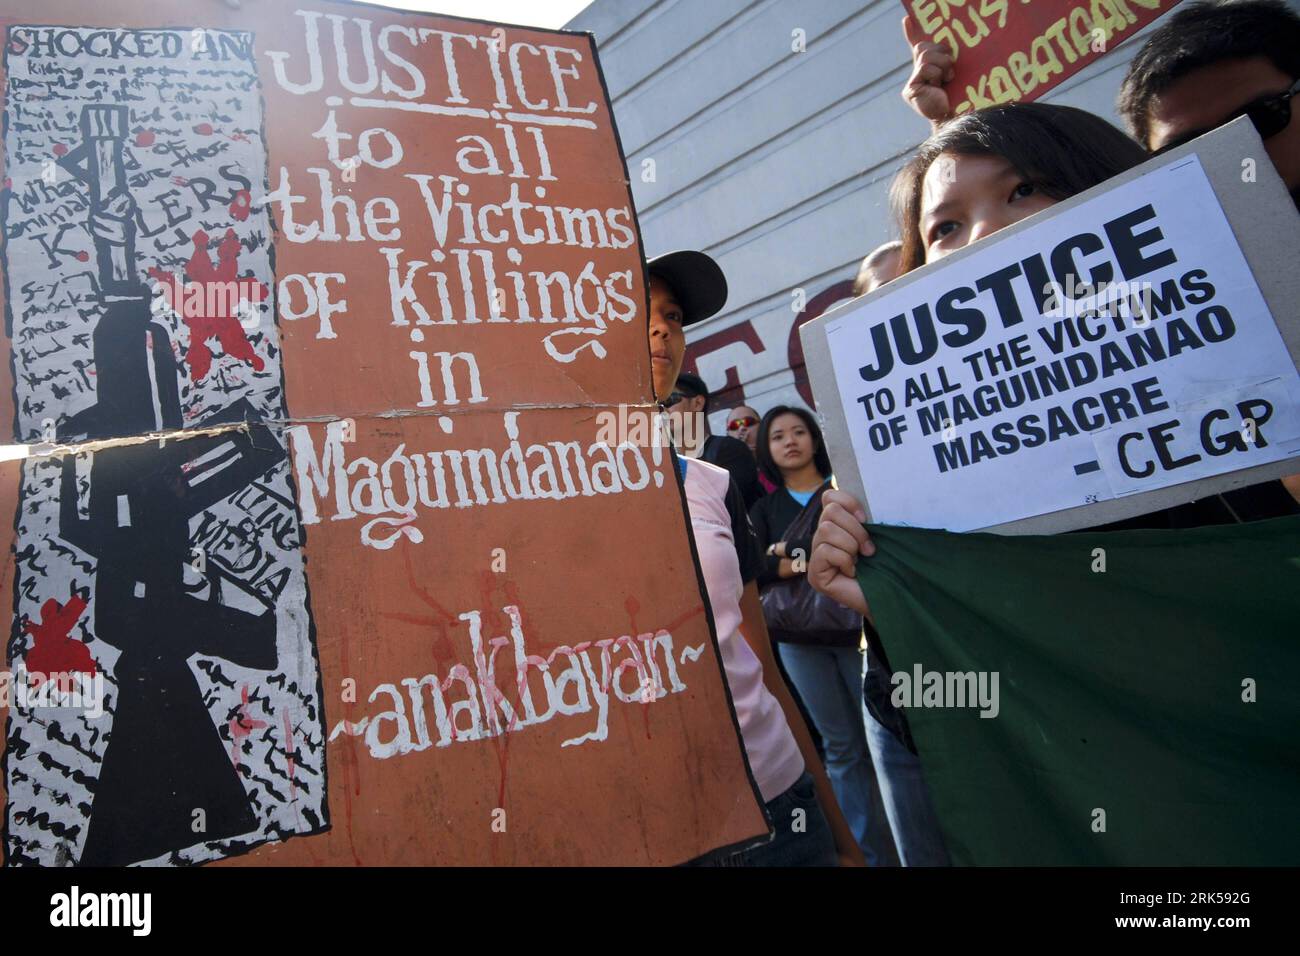 Bildnummer: 53724065  Datum: 13.01.2010  Copyright: imago/Xinhua Protesters hold placards with slogans during a rally calling for justice for victims of Maguindanao massacre in front of the Philippine National Police (PNP) Headquarters in Quezon City northeast of Manila, Philippines, Jan. 13, 2010. The second hearing of Andal Ampatuan, Jr., the principal accussed in the Maguindanao massacre in Mindanao was held here on Wednesday, and a witness testified that he saw a member of a powerful clan and his relatives firing their guns as journalists and women among 57 victims knelt and begged for the Stock Photo